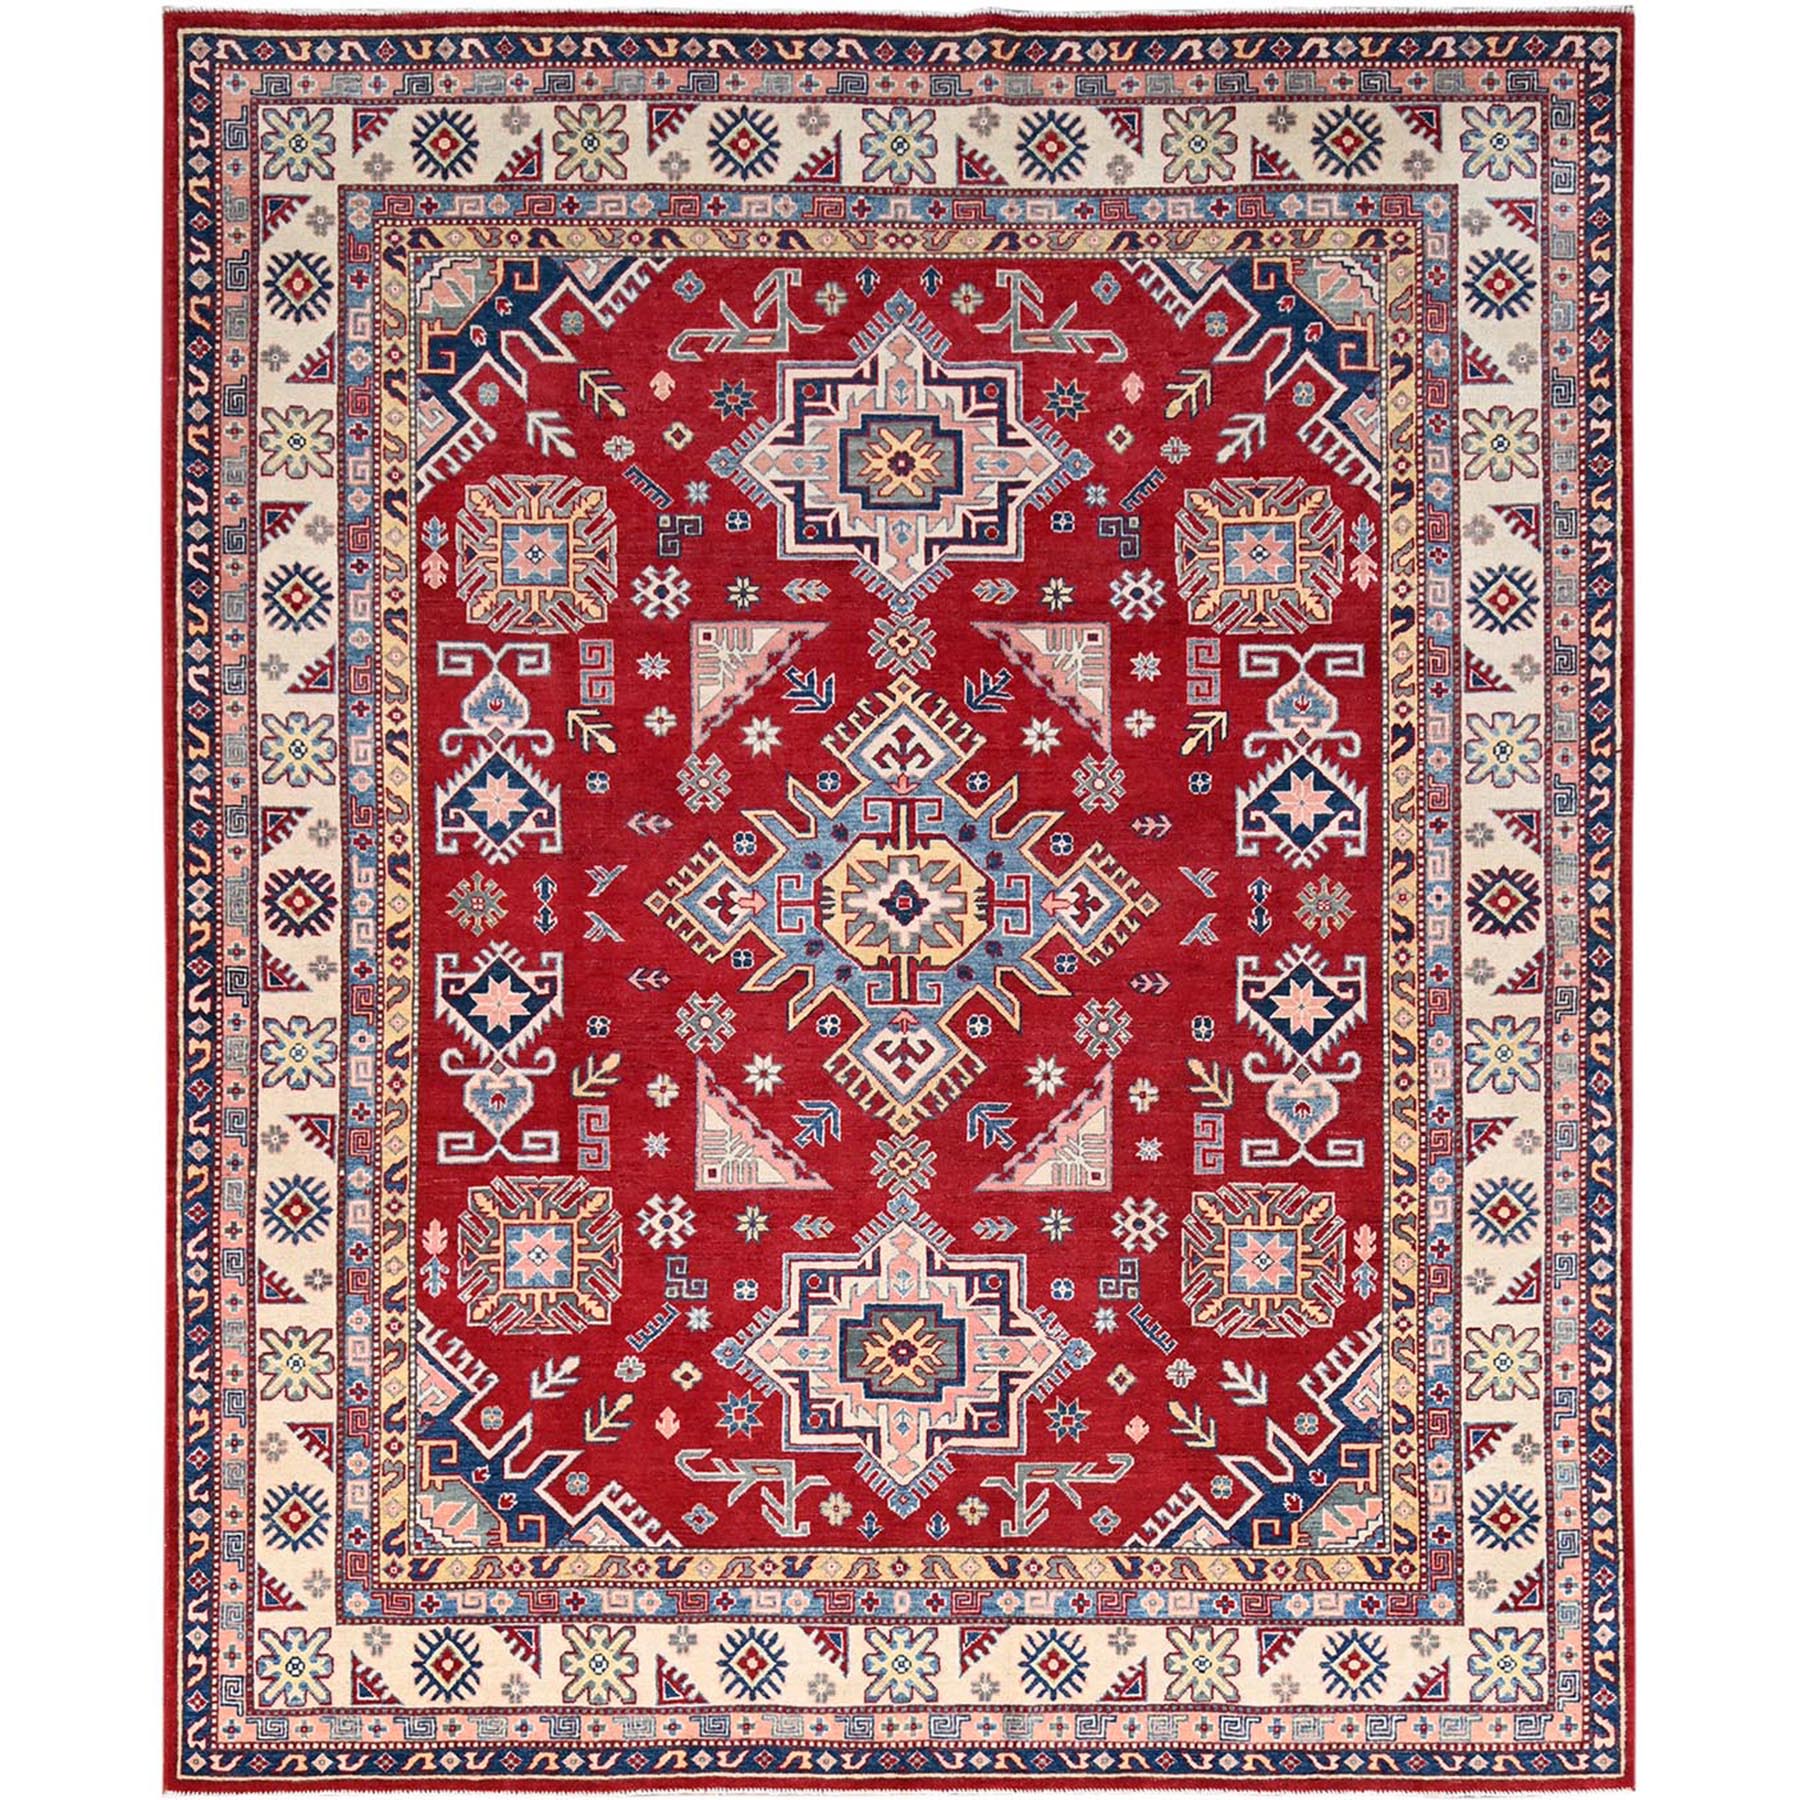 Apple Red With Navajo White Border, Hand Knotted, Densely Woven Kazak, Tribal Medallion Design Extra Soft Wool Natural Dyes, Oriental Rug